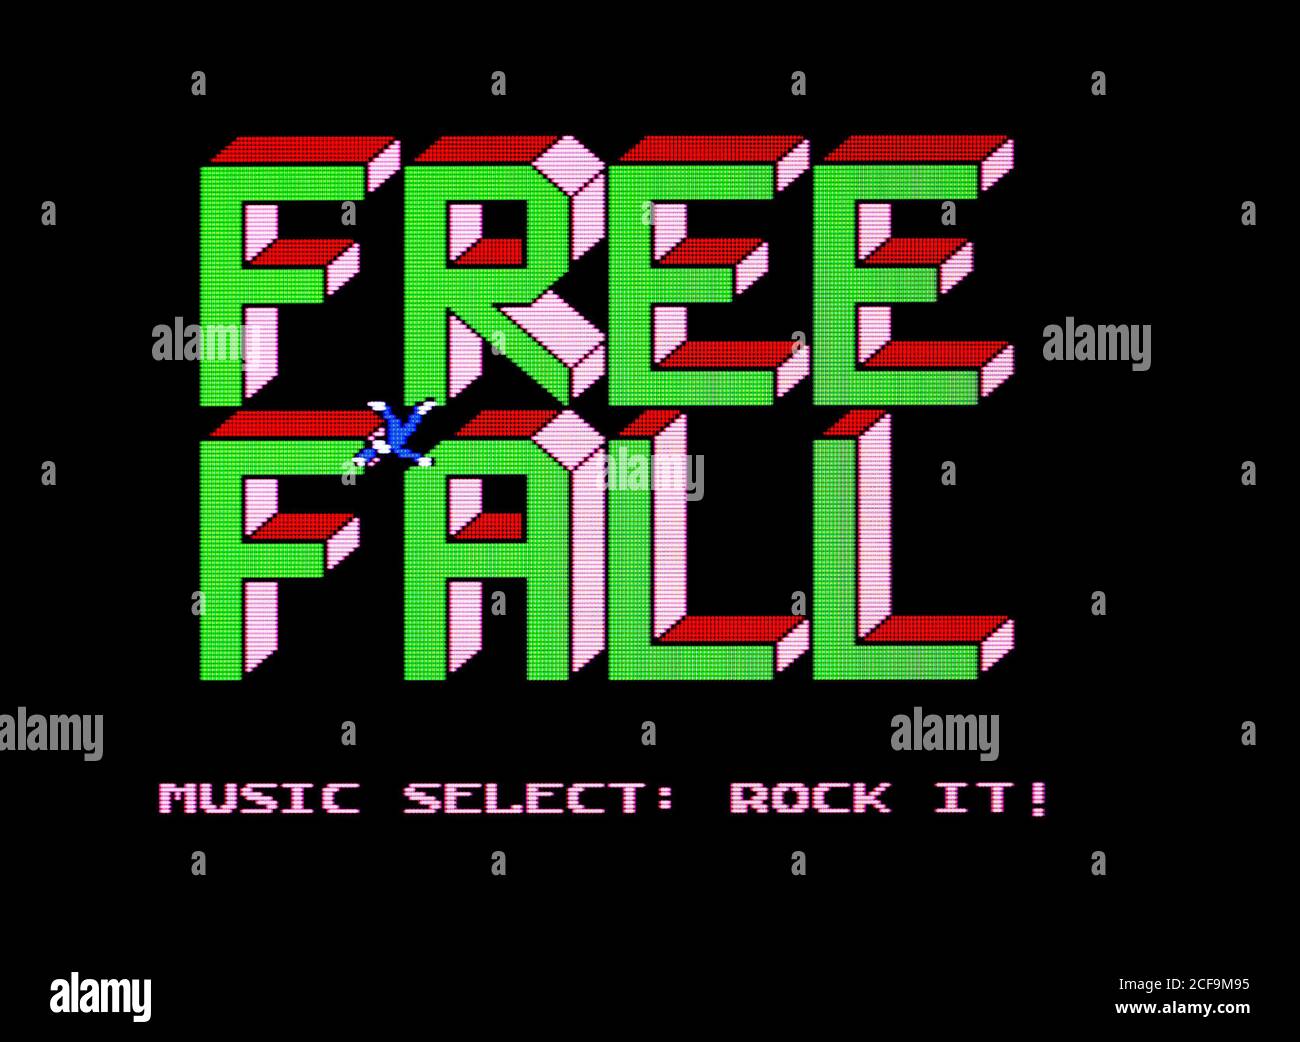 Free Fall - Nintendo Entertainment System - NES Videogame - Editorial use only Stock Photo